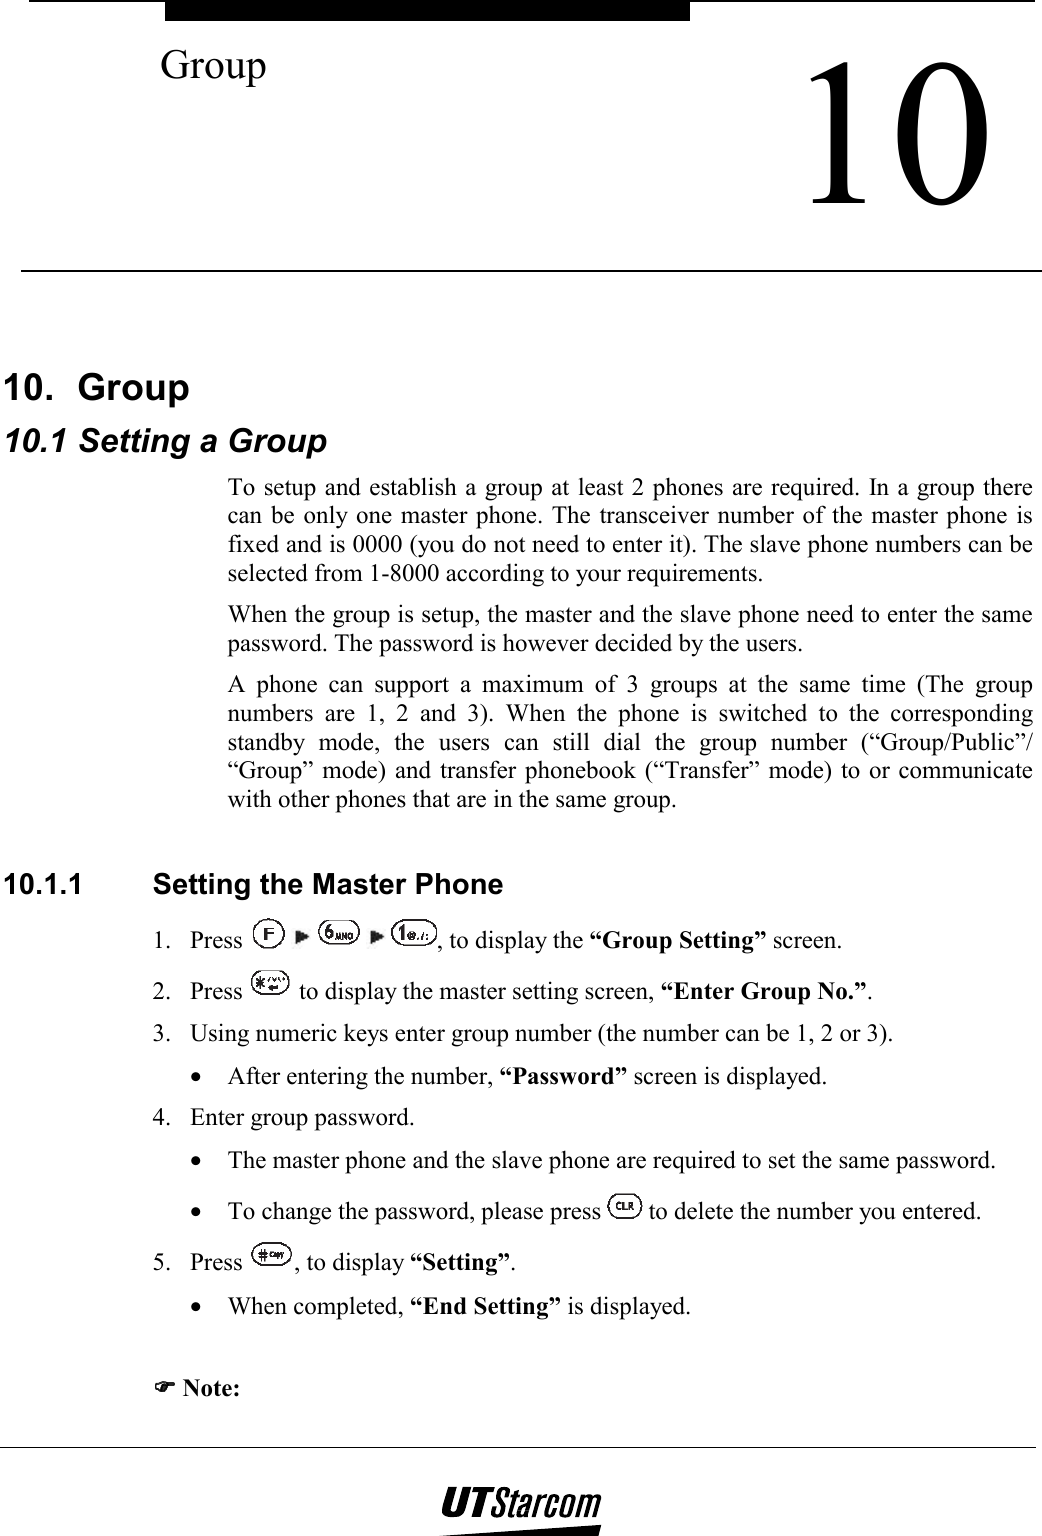  10 Group    10. Group 10.1 Setting a Group To setup and establish a group at least 2 phones are required. In a group there can be only one master phone. The transceiver number of the master phone is fixed and is 0000 (you do not need to enter it). The slave phone numbers can be selected from 1-8000 according to your requirements. When the group is setup, the master and the slave phone need to enter the same password. The password is however decided by the users. A phone can support a maximum of 3 groups at the same time (The group numbers are 1, 2 and 3). When the phone is switched to the corresponding standby mode, the users can still dial the group number (“Group/Public”/ “Group” mode) and transfer phonebook (“Transfer” mode) to or communicate with other phones that are in the same group.   10.1.1  Setting the Master Phone 1. Press          , to display the “Group Setting” screen. 2. Press   to display the master setting screen, “Enter Group No.”. 3.  Using numeric keys enter group number (the number can be 1, 2 or 3). •  After entering the number, “Password” screen is displayed. 4.  Enter group password. •  The master phone and the slave phone are required to set the same password. •  To change the password, please press   to delete the number you entered. 5. Press  , to display “Setting”. •  When completed, “End Setting” is displayed.  )))) Note: 